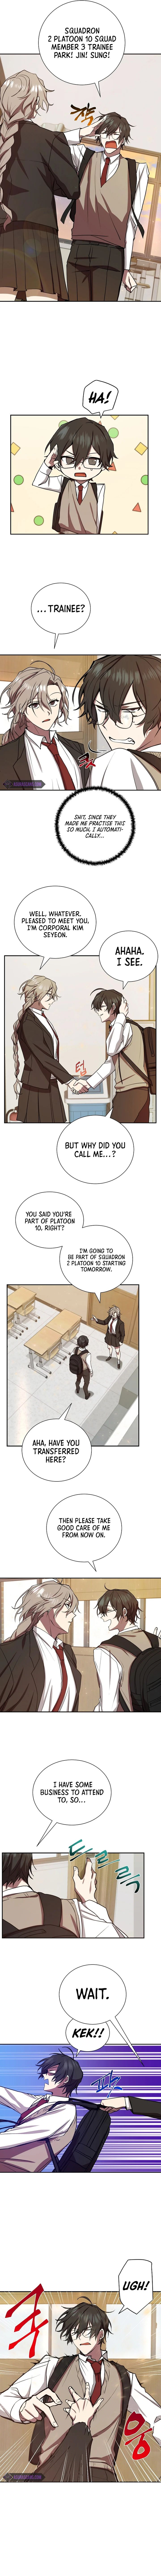 My School Life Pretending To Be a Worthless Person - Chapter 8 Page 4